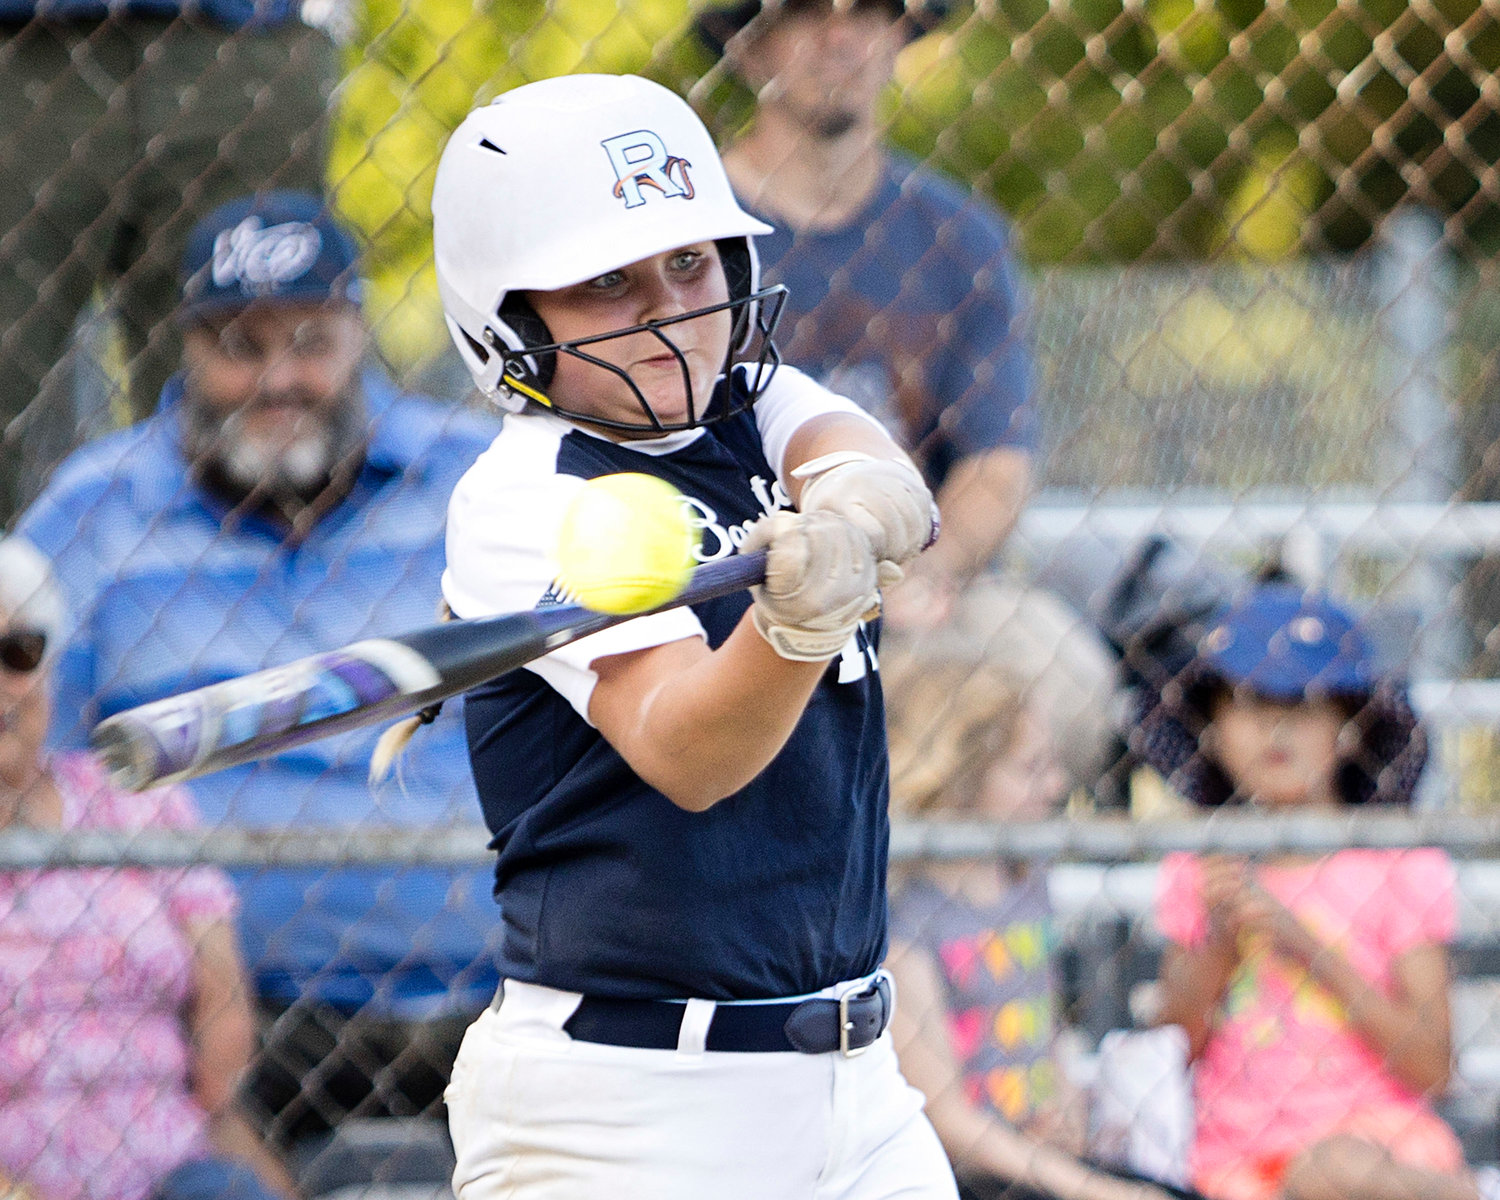 Erin Moran makes contact while at-bat against Tiverton in the 12U All-Star playoffs, Wednesday.